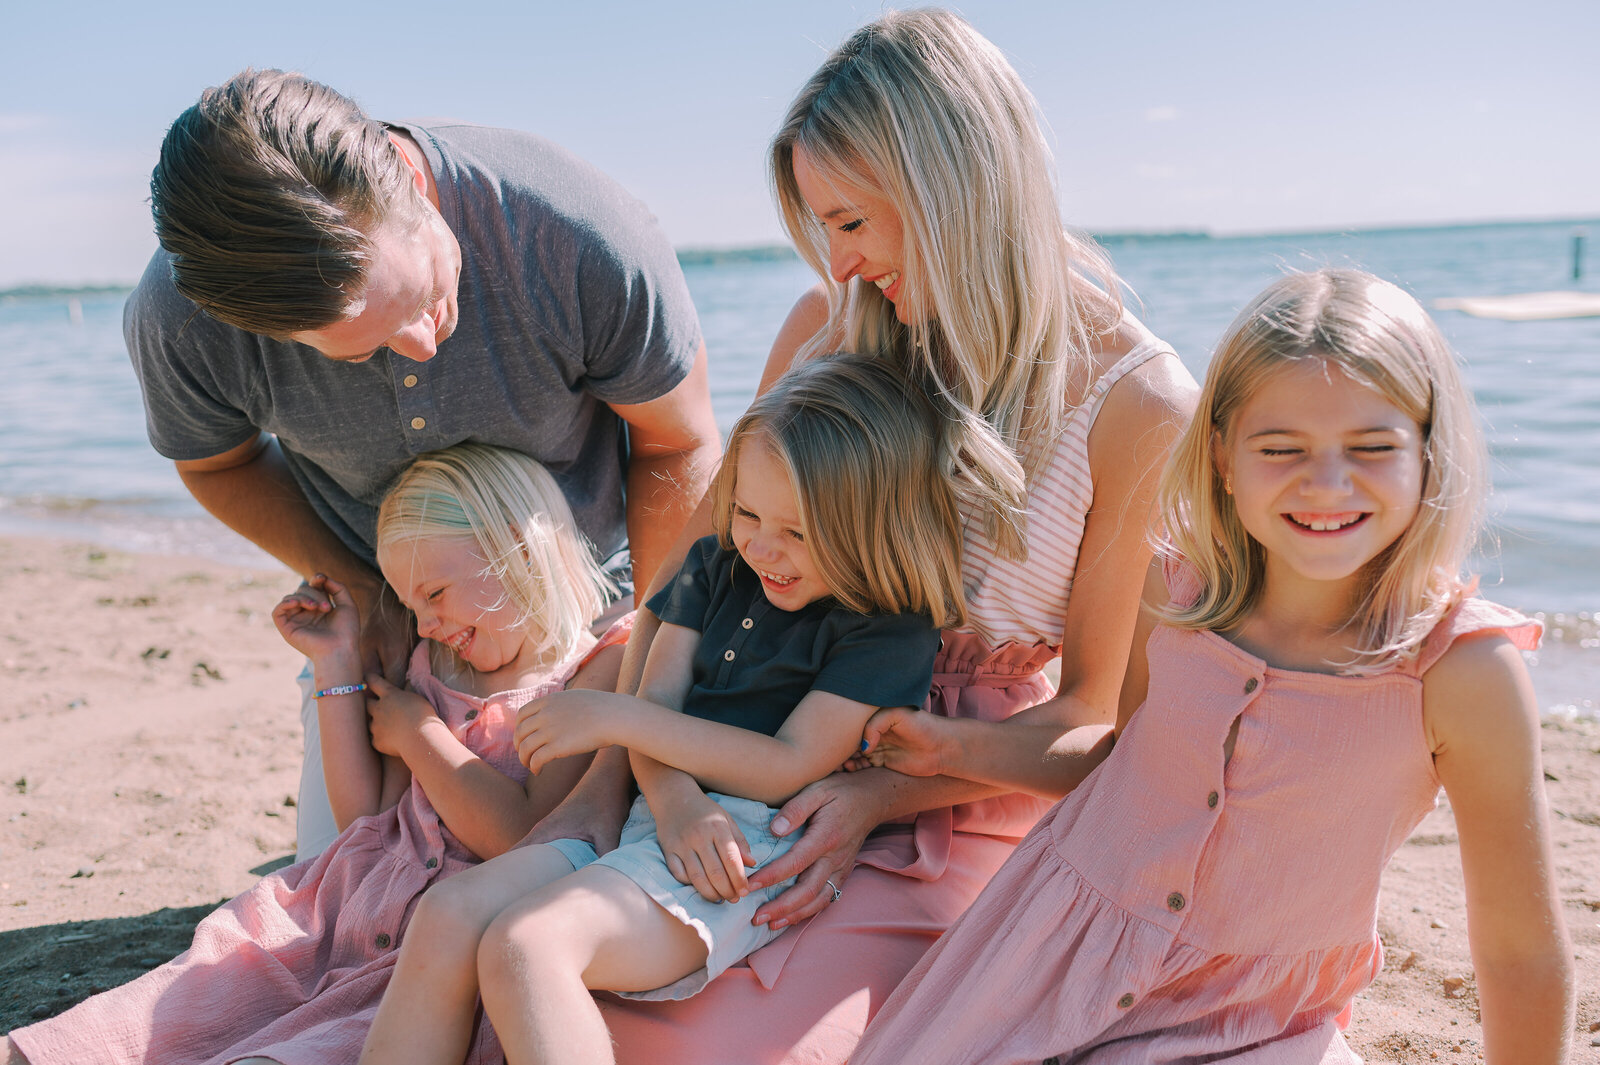 Family photographer in Brainerd, MN | Family photography in Staples, MN | Family photos in Little Falls, Aitkin, Crosby, Pequot Lakes, Breezy Point, Crosslake photography.